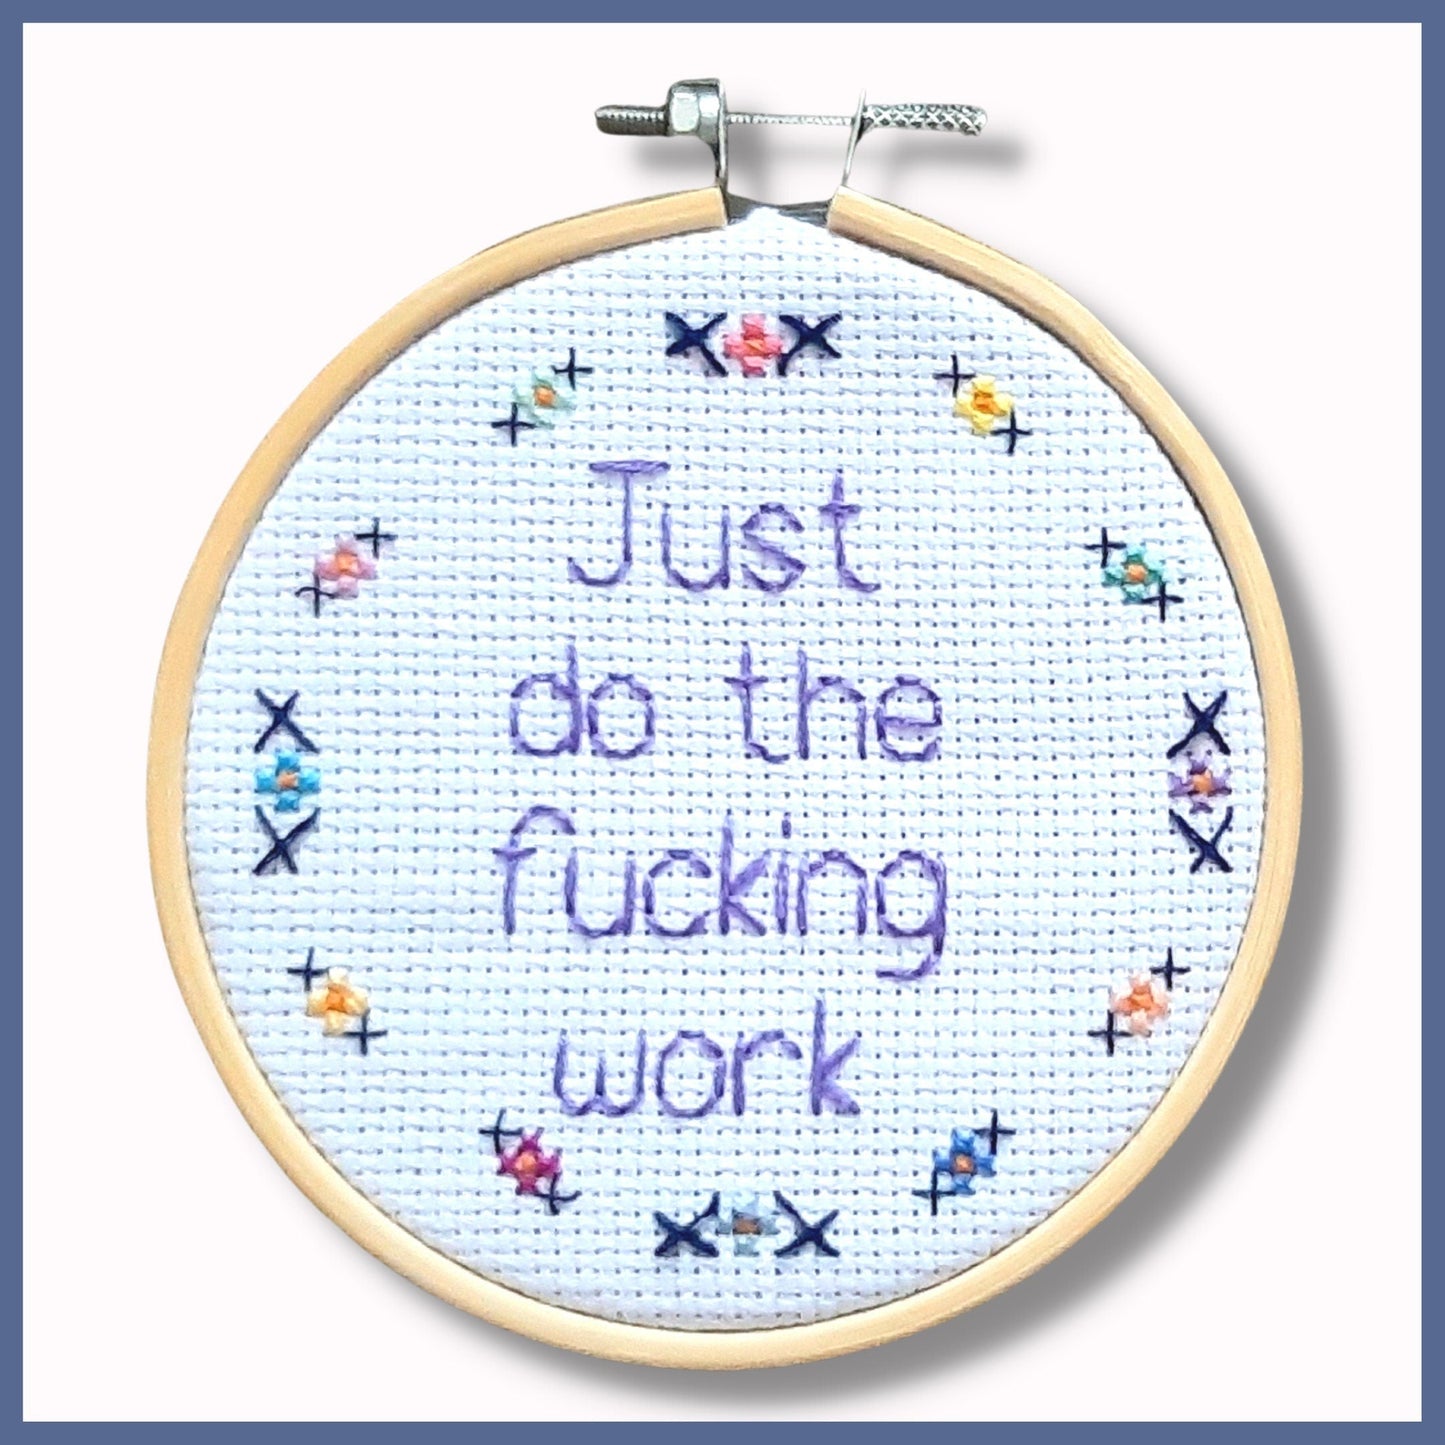 4 inch hoop from Thistleflat Crafts with embroidered quote 'Just do the fucking work' in purple thread with flower border